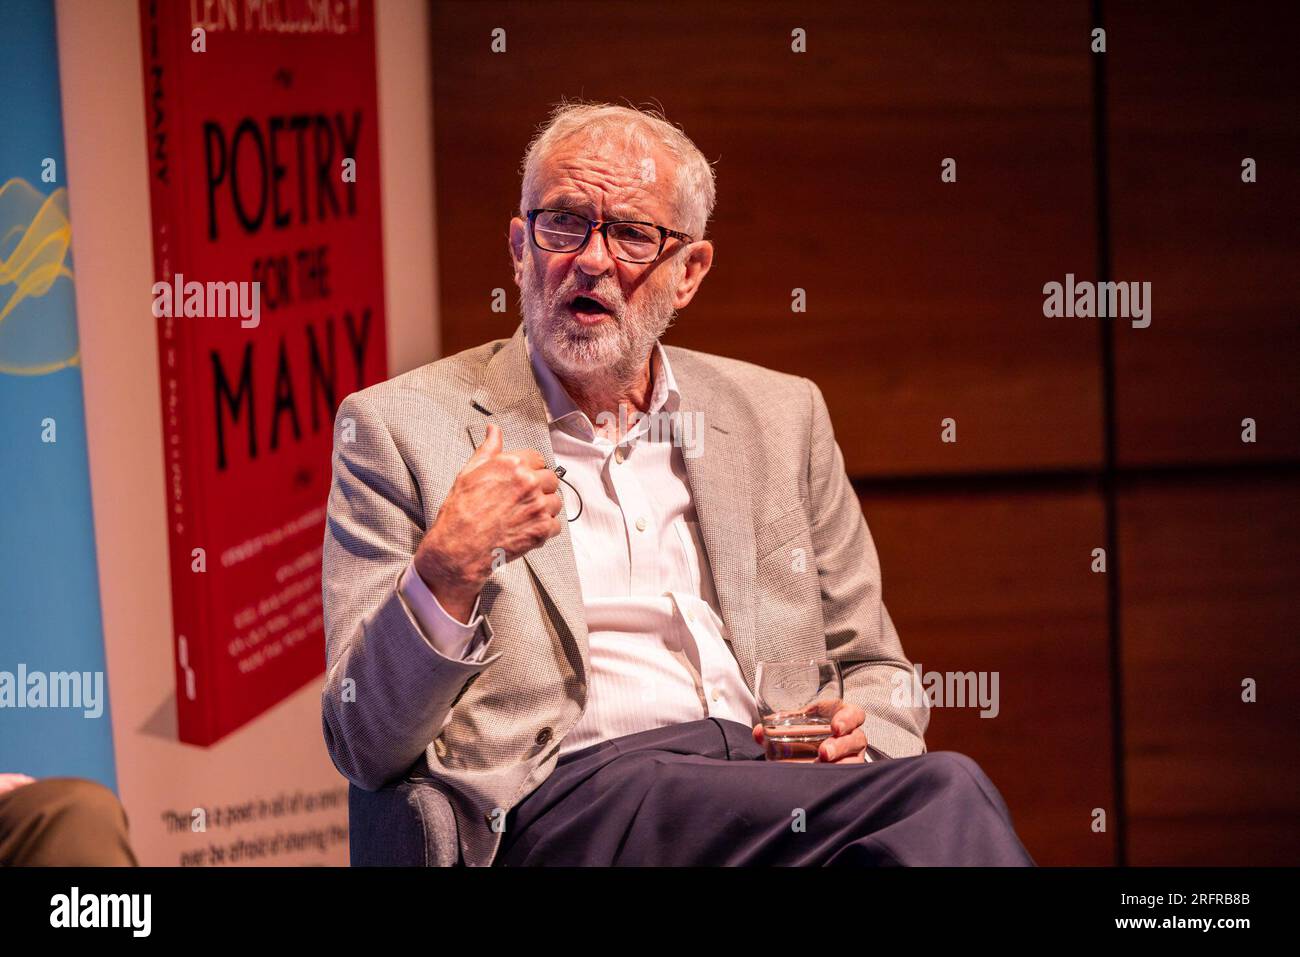 Edinburgh, United Kingdom. 05 August, 2023 Pictured: Jeremy Corbyn. Former Labour leader Jeremy Corbyn MP and renowned trade unionist Len McCluskey are interviewed by LBC presenter Iain Dale at the Edinburgh Fringe. During the interview McCluskey accused Keir Starmer of reneging on an agreement to retain Corbyn in the Labour Party. Jeremy Corbyn was quizzed if he will stand as an independent candidate in his constituency and responded by saying ‘watch this space’. Credit: Rich Dyson/Alamy Live News Stock Photo